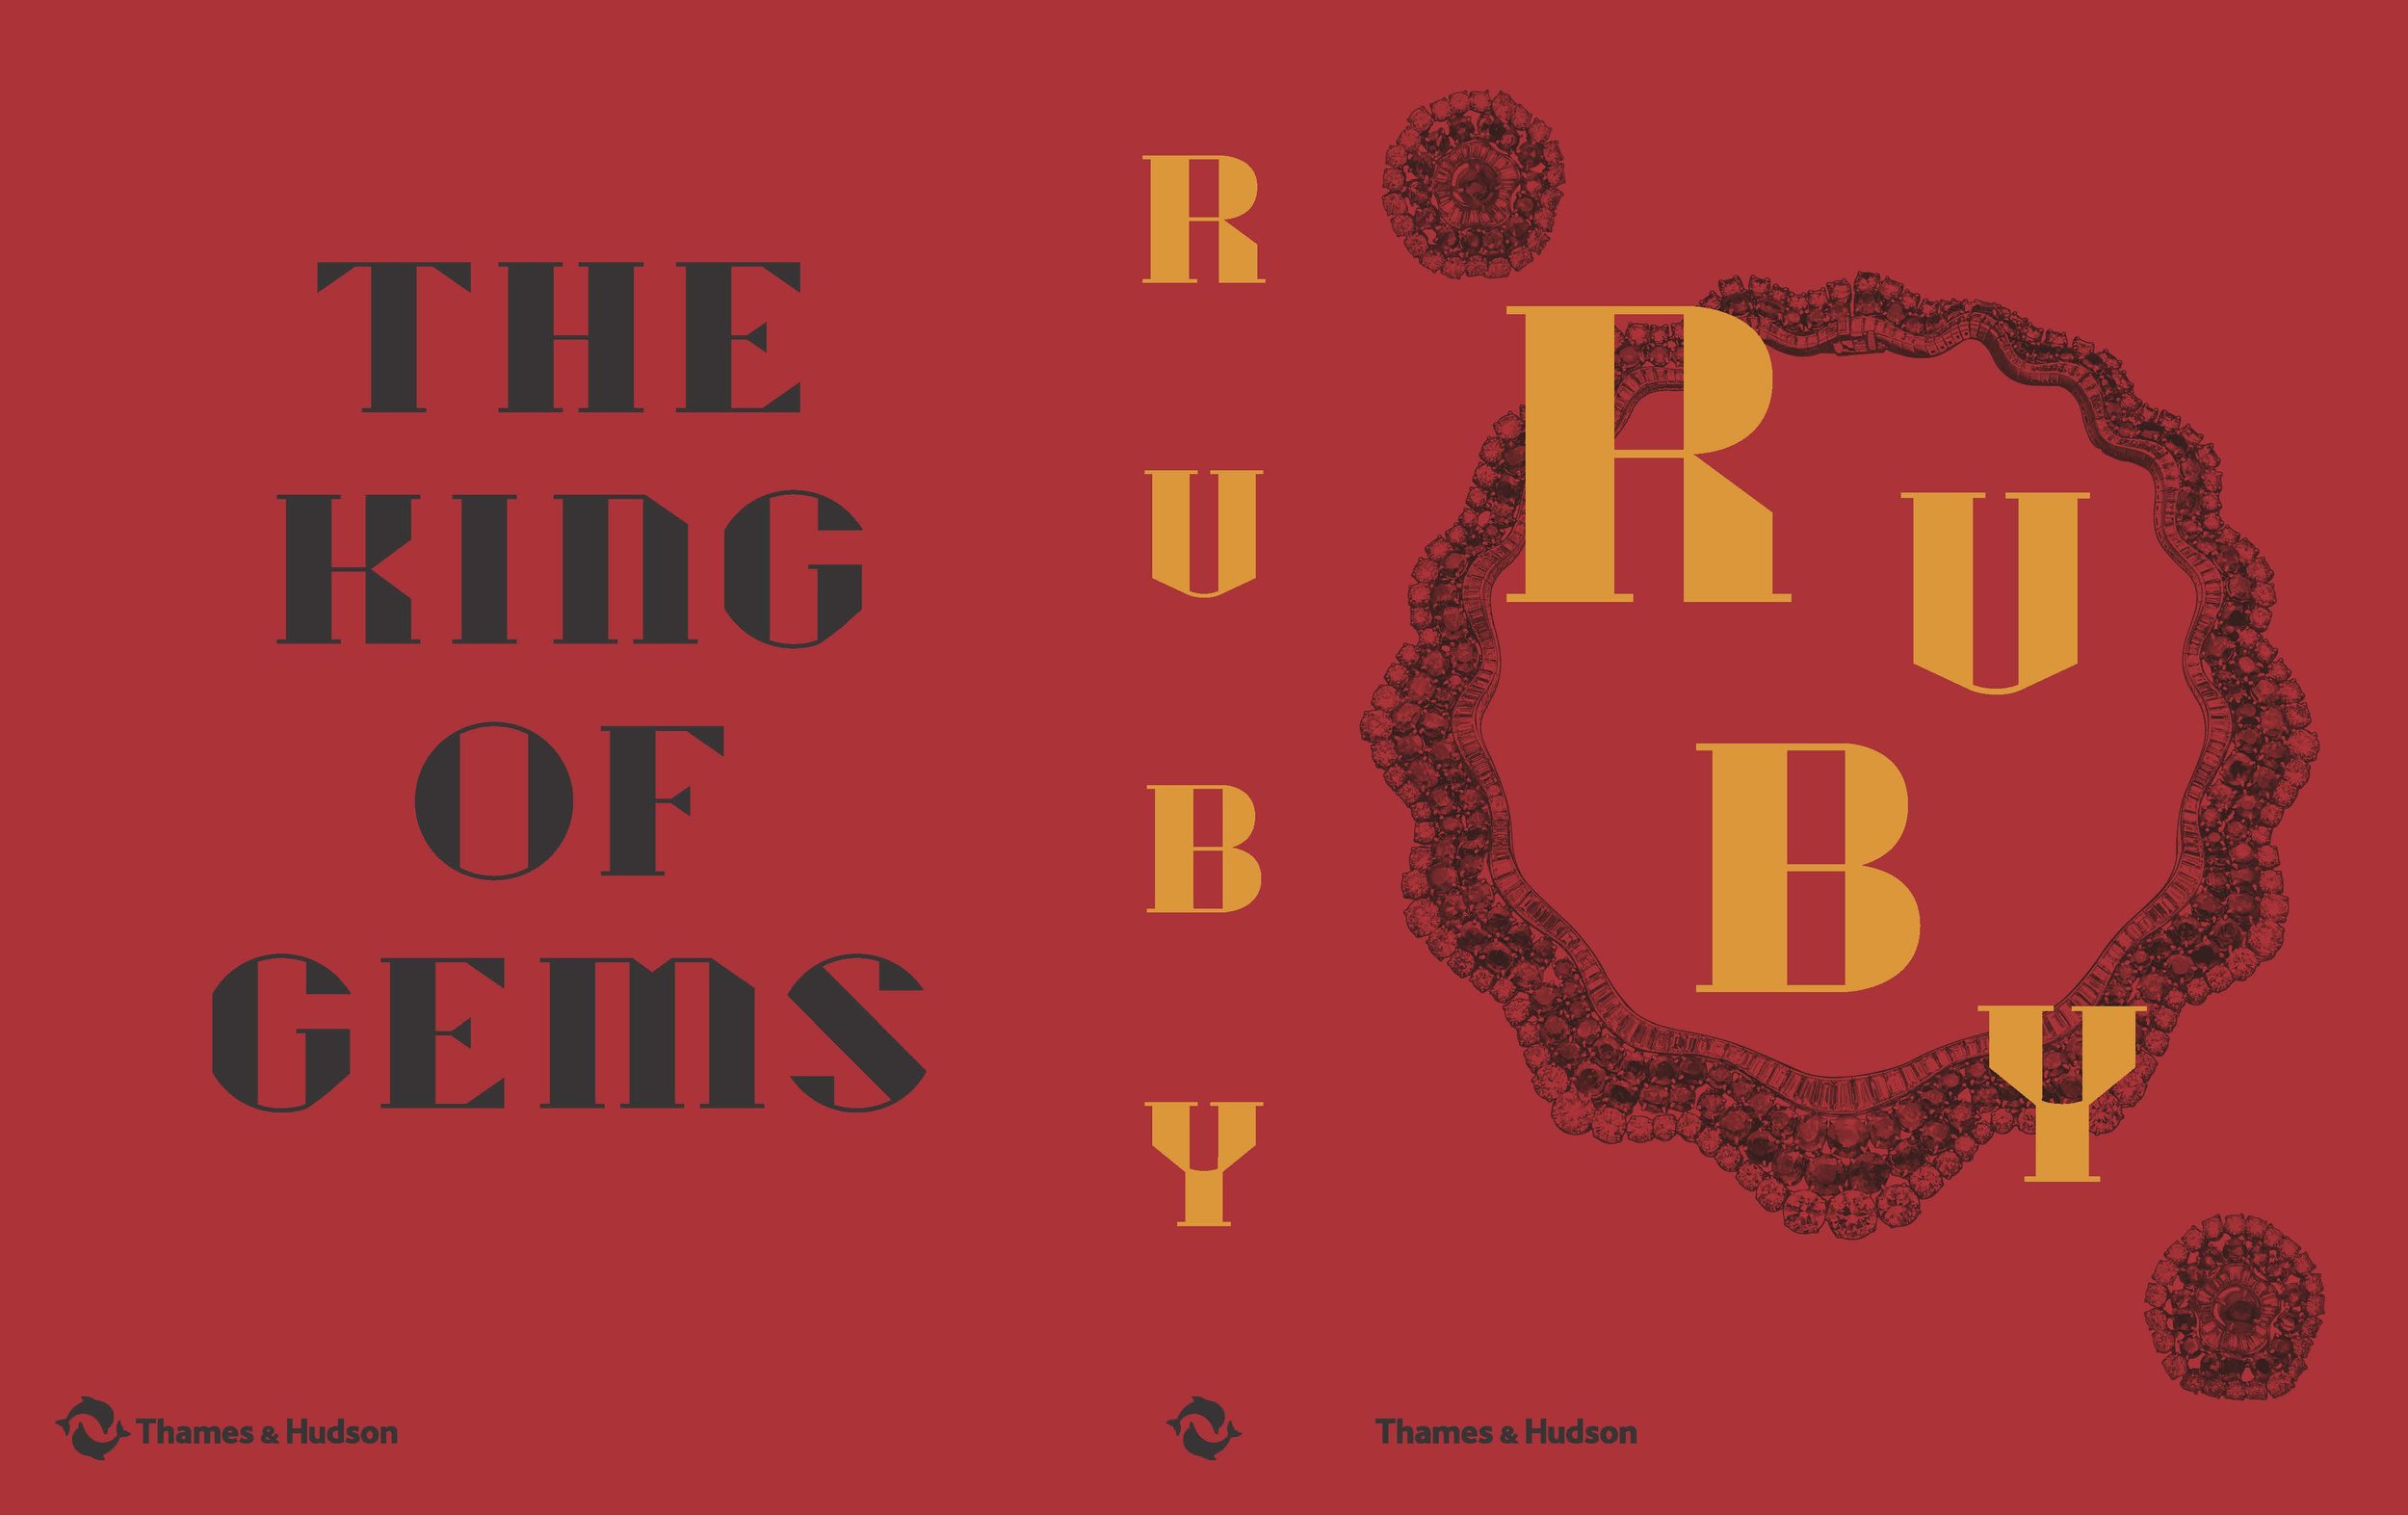 RUBY_published 2017 by Thames and Hudson in association with Violette Editions.jpg